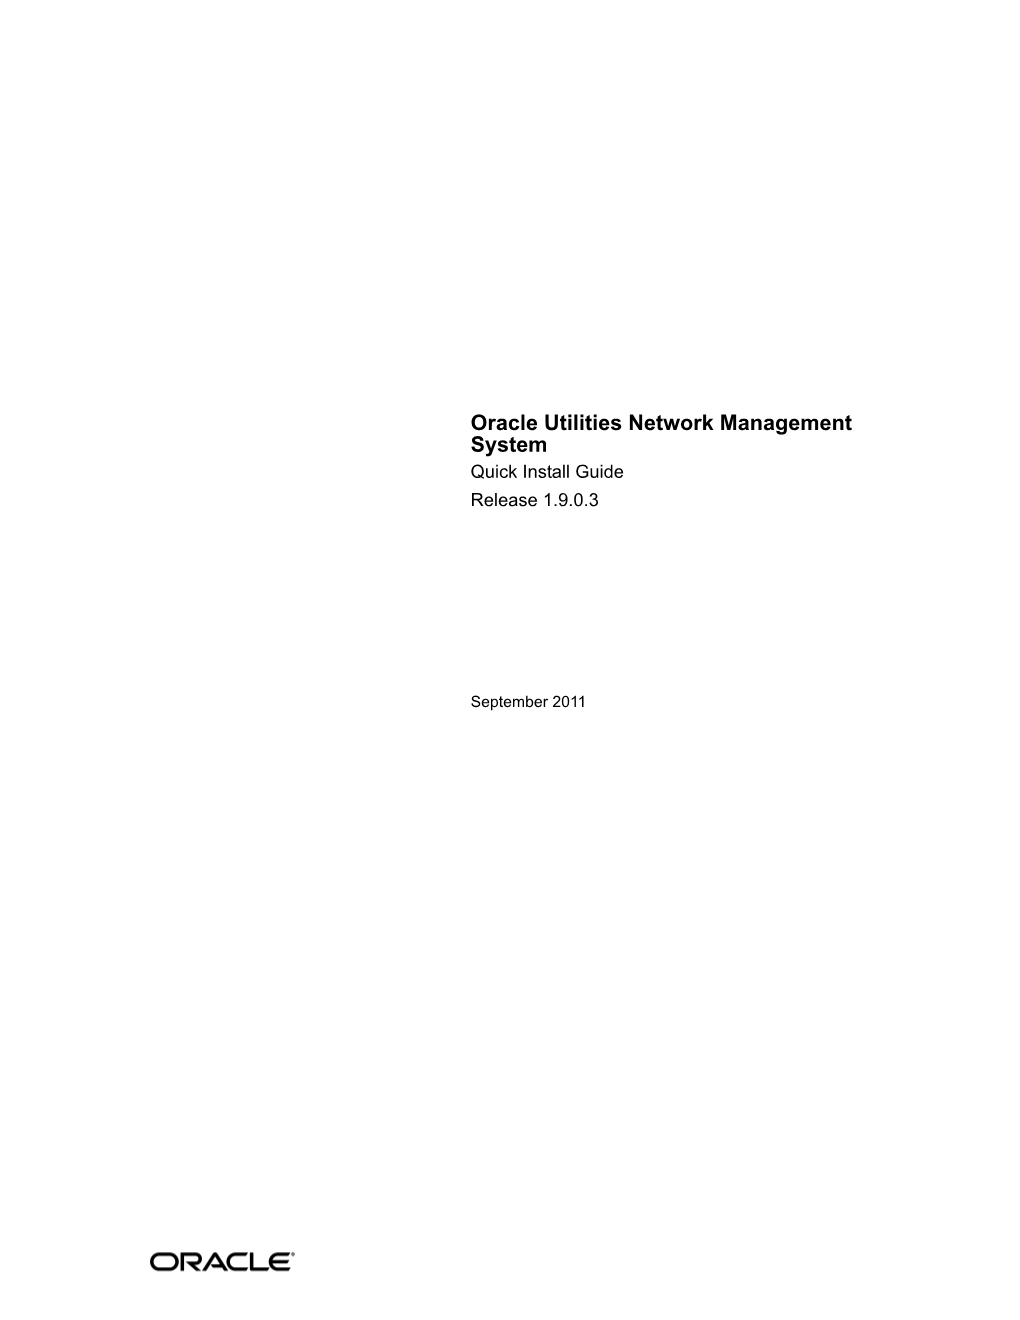 Oracle Utilities Network Management System Quick Install Guide Release 1.9.0.3